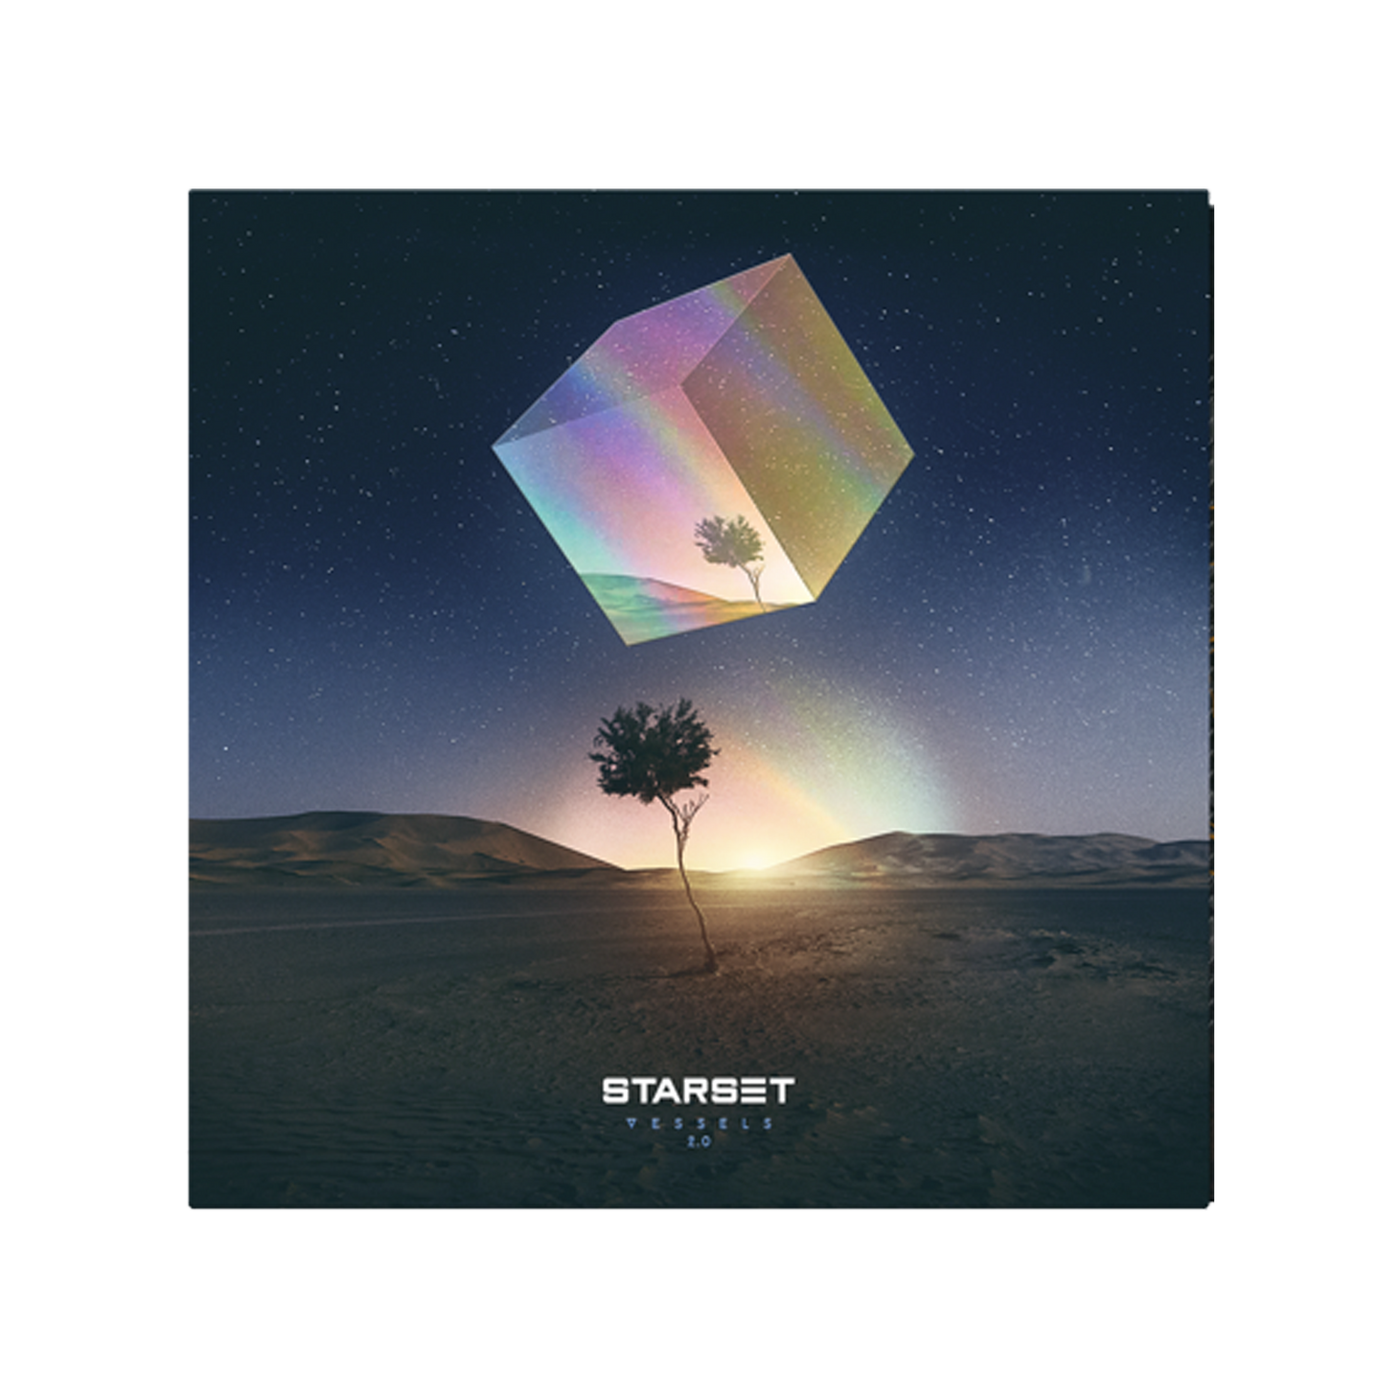 Starset – Vessels 2.0 CD – Fearless Records